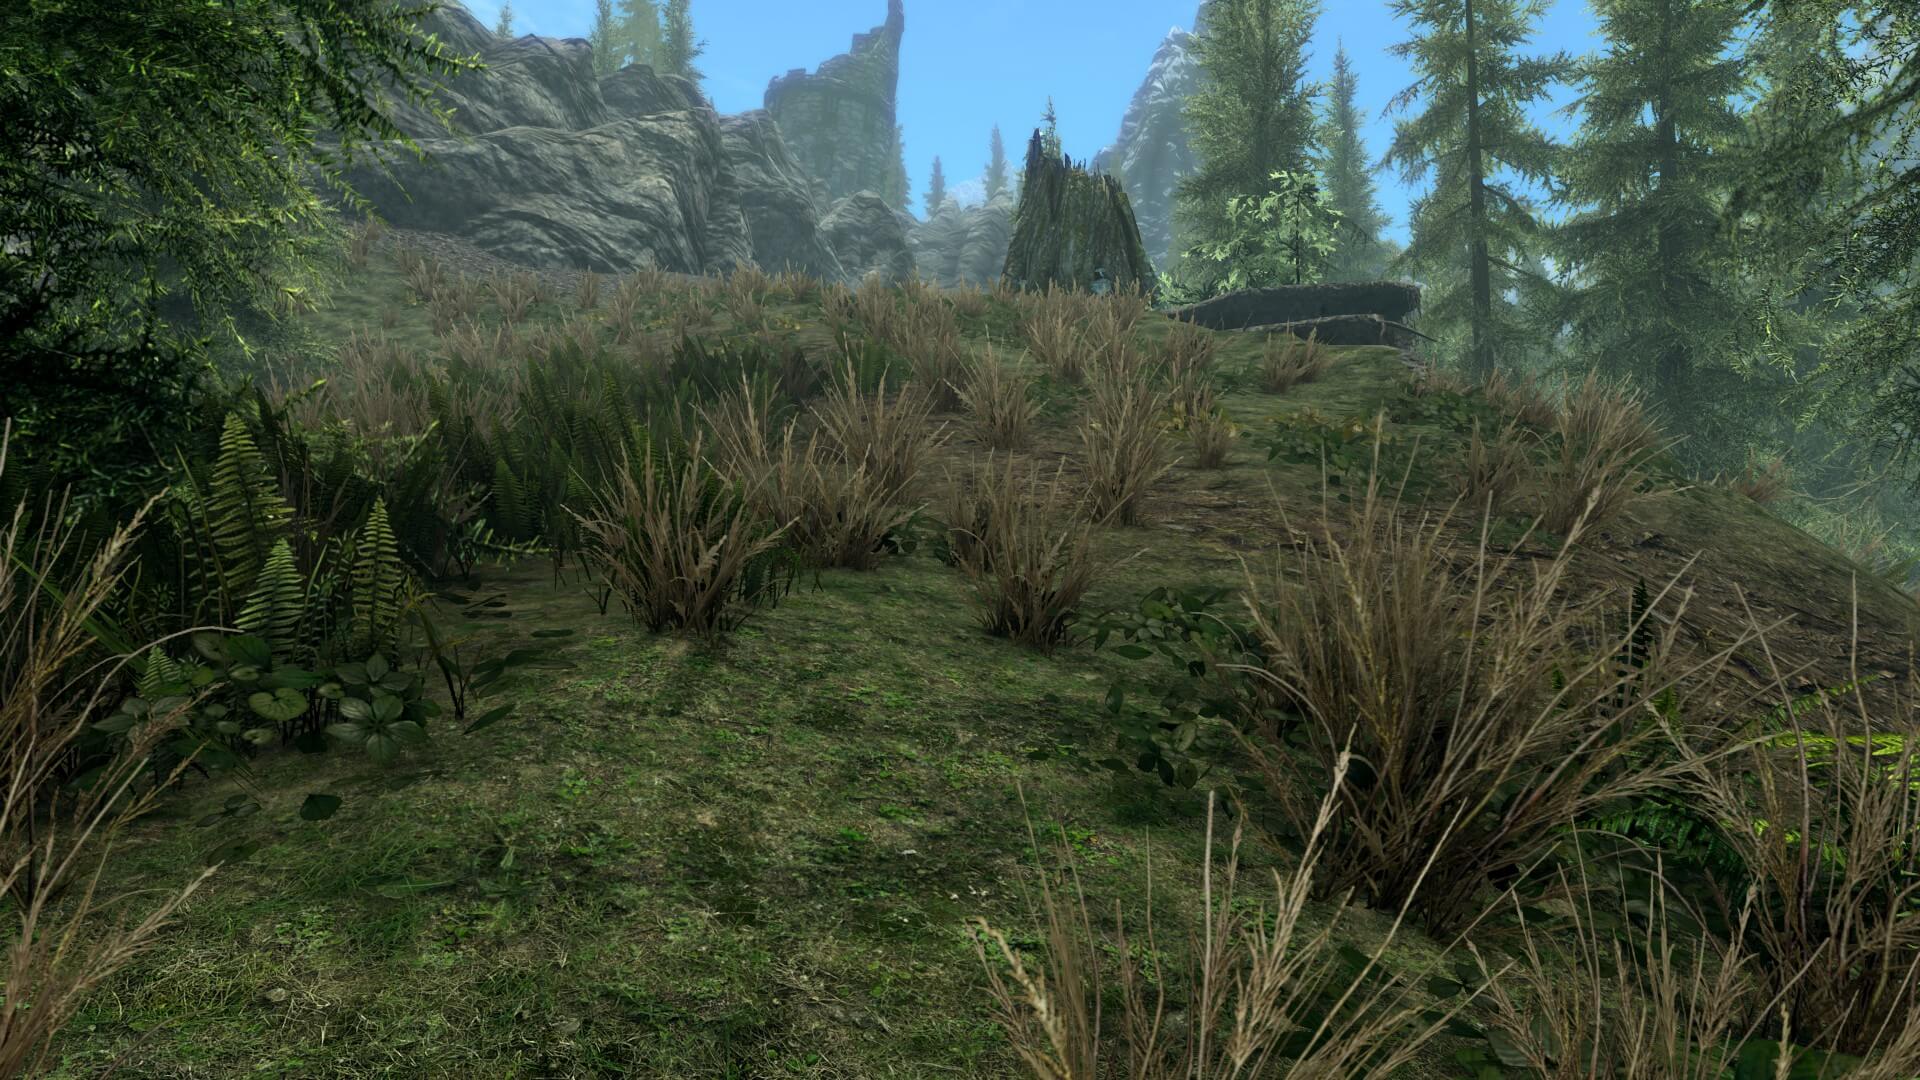 New Version Of Skyland Triple A Hd Quality Landscape Texture Pack For Skyrim Available For Download